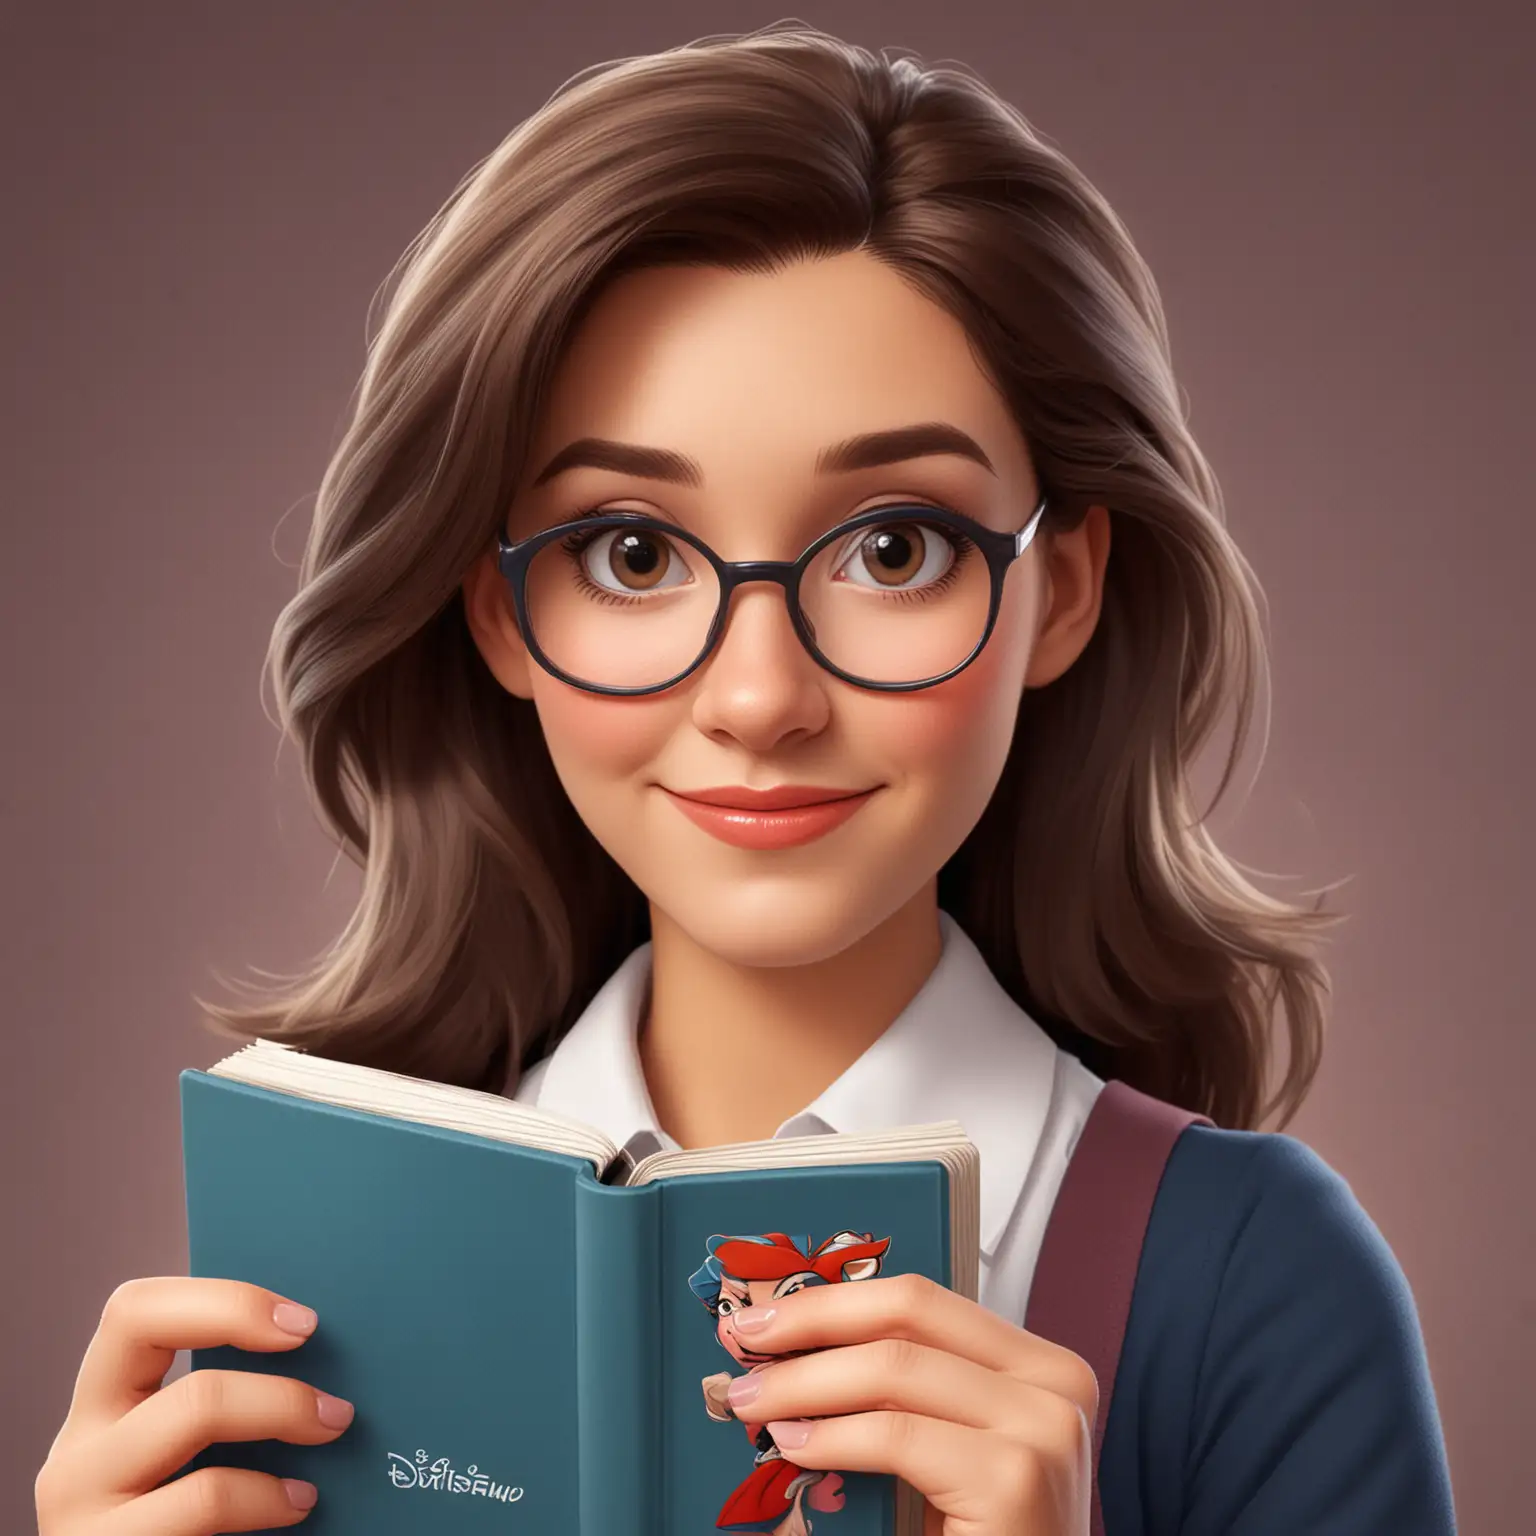 Cute-Female-Teacher-with-English-Book-in-Disney-Character-Style